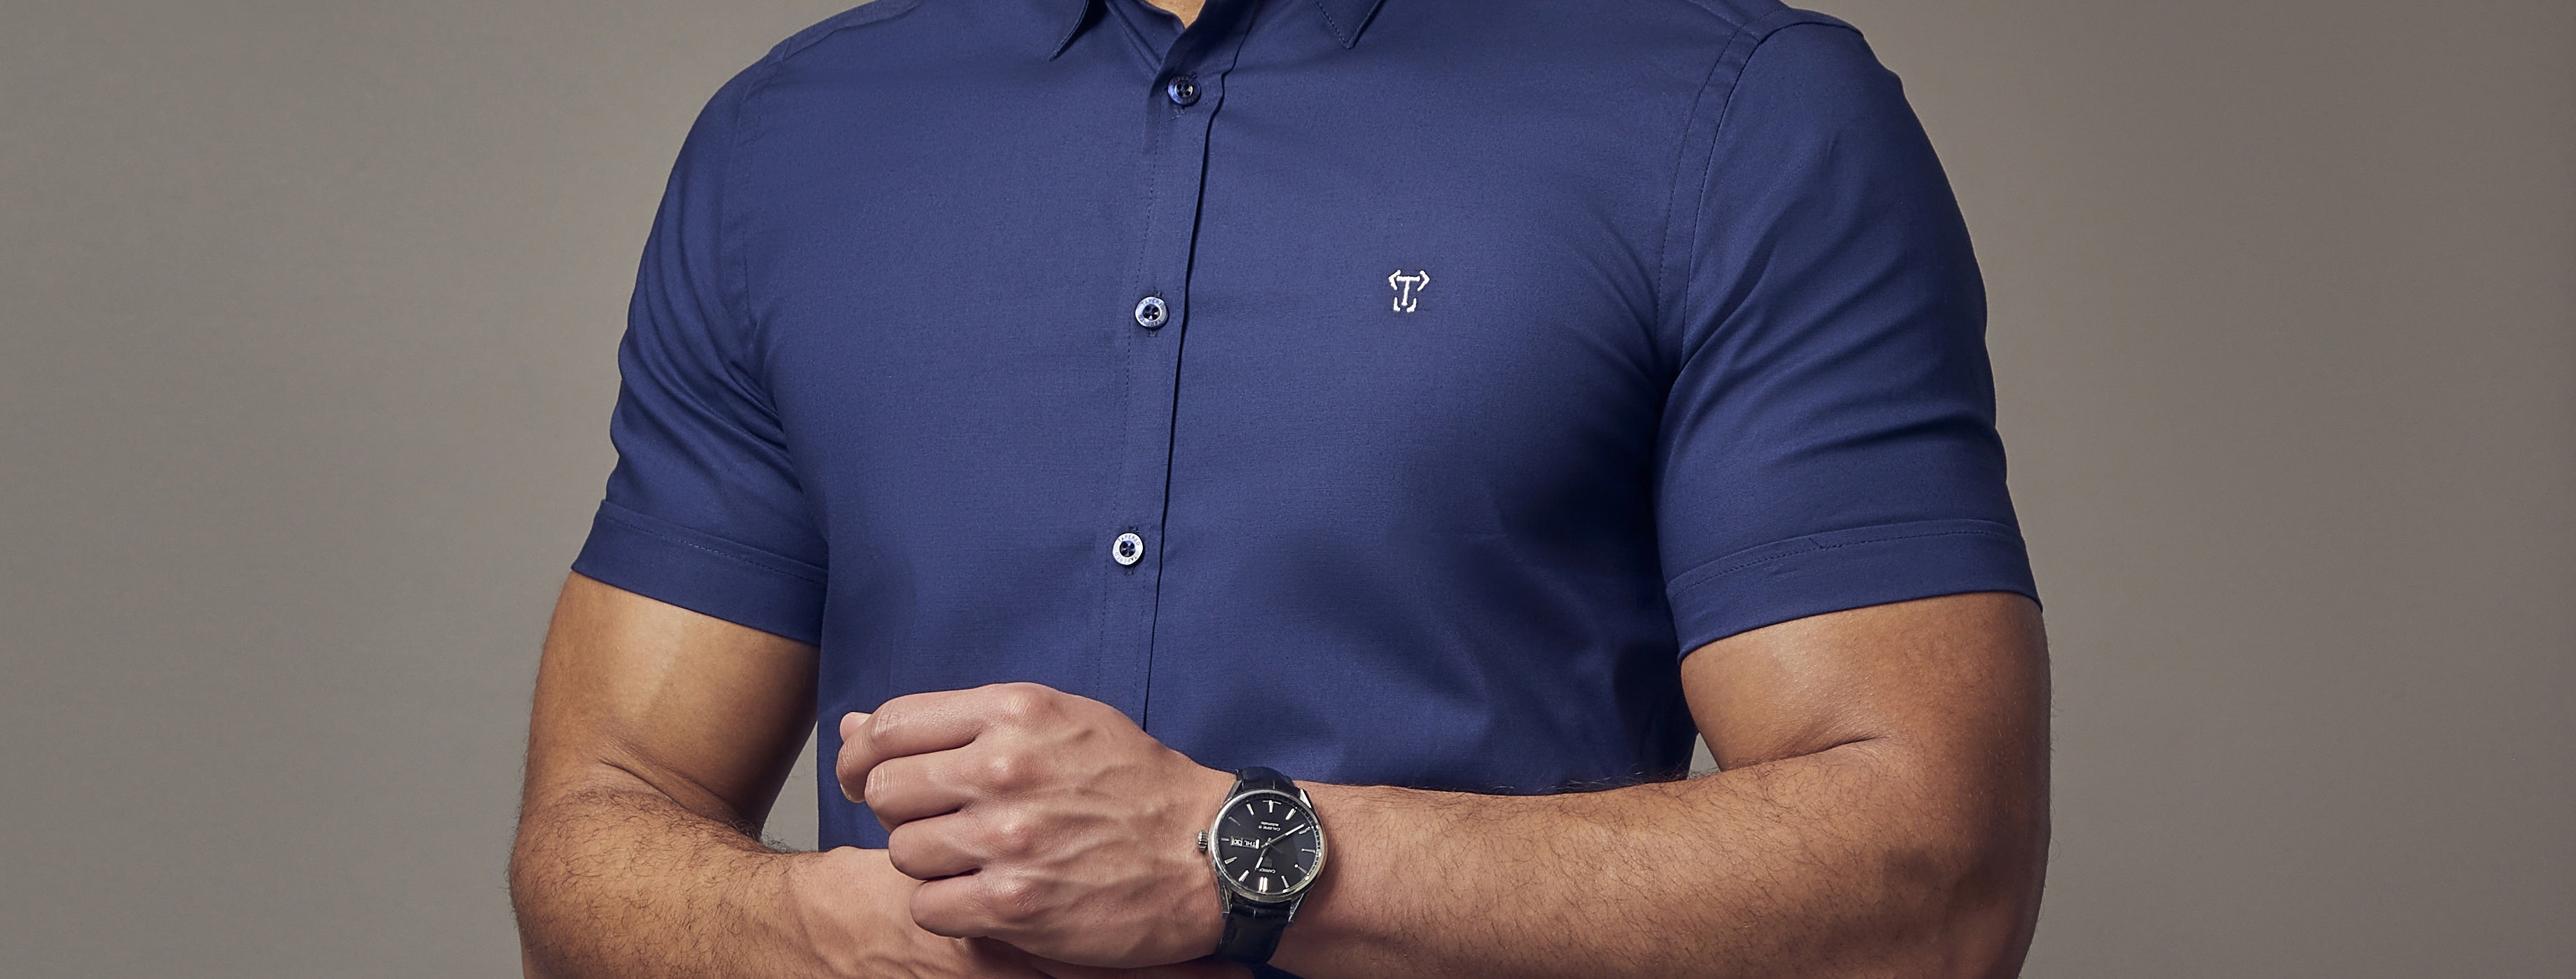 Button-Up Shirts for Men: Shop Long & Short Sleeves